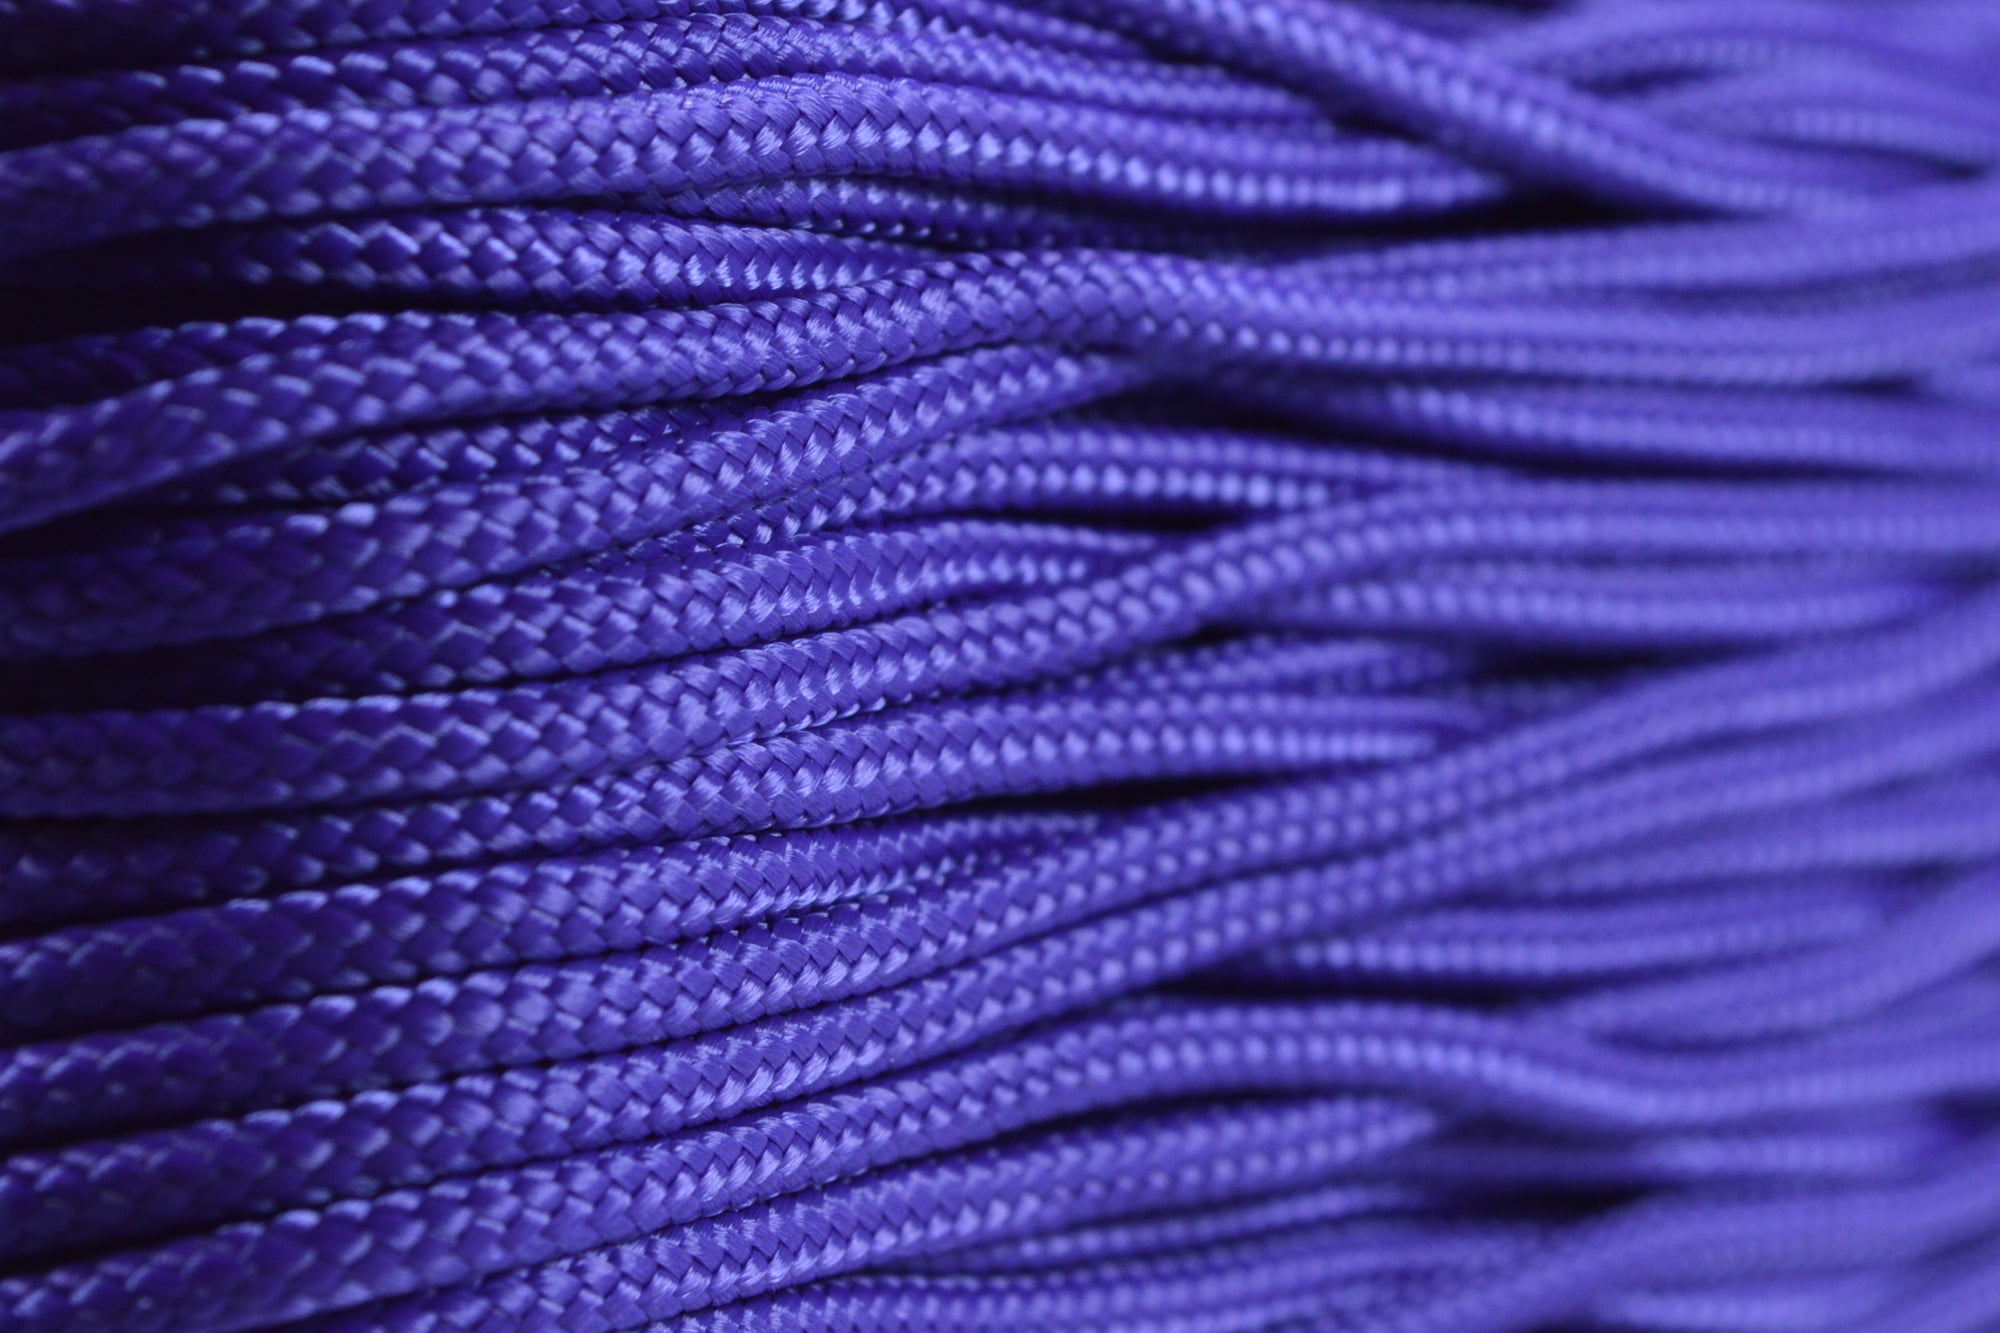 2mm Reflective Paracord 1 Inner Core Type I - 100lb Breaking